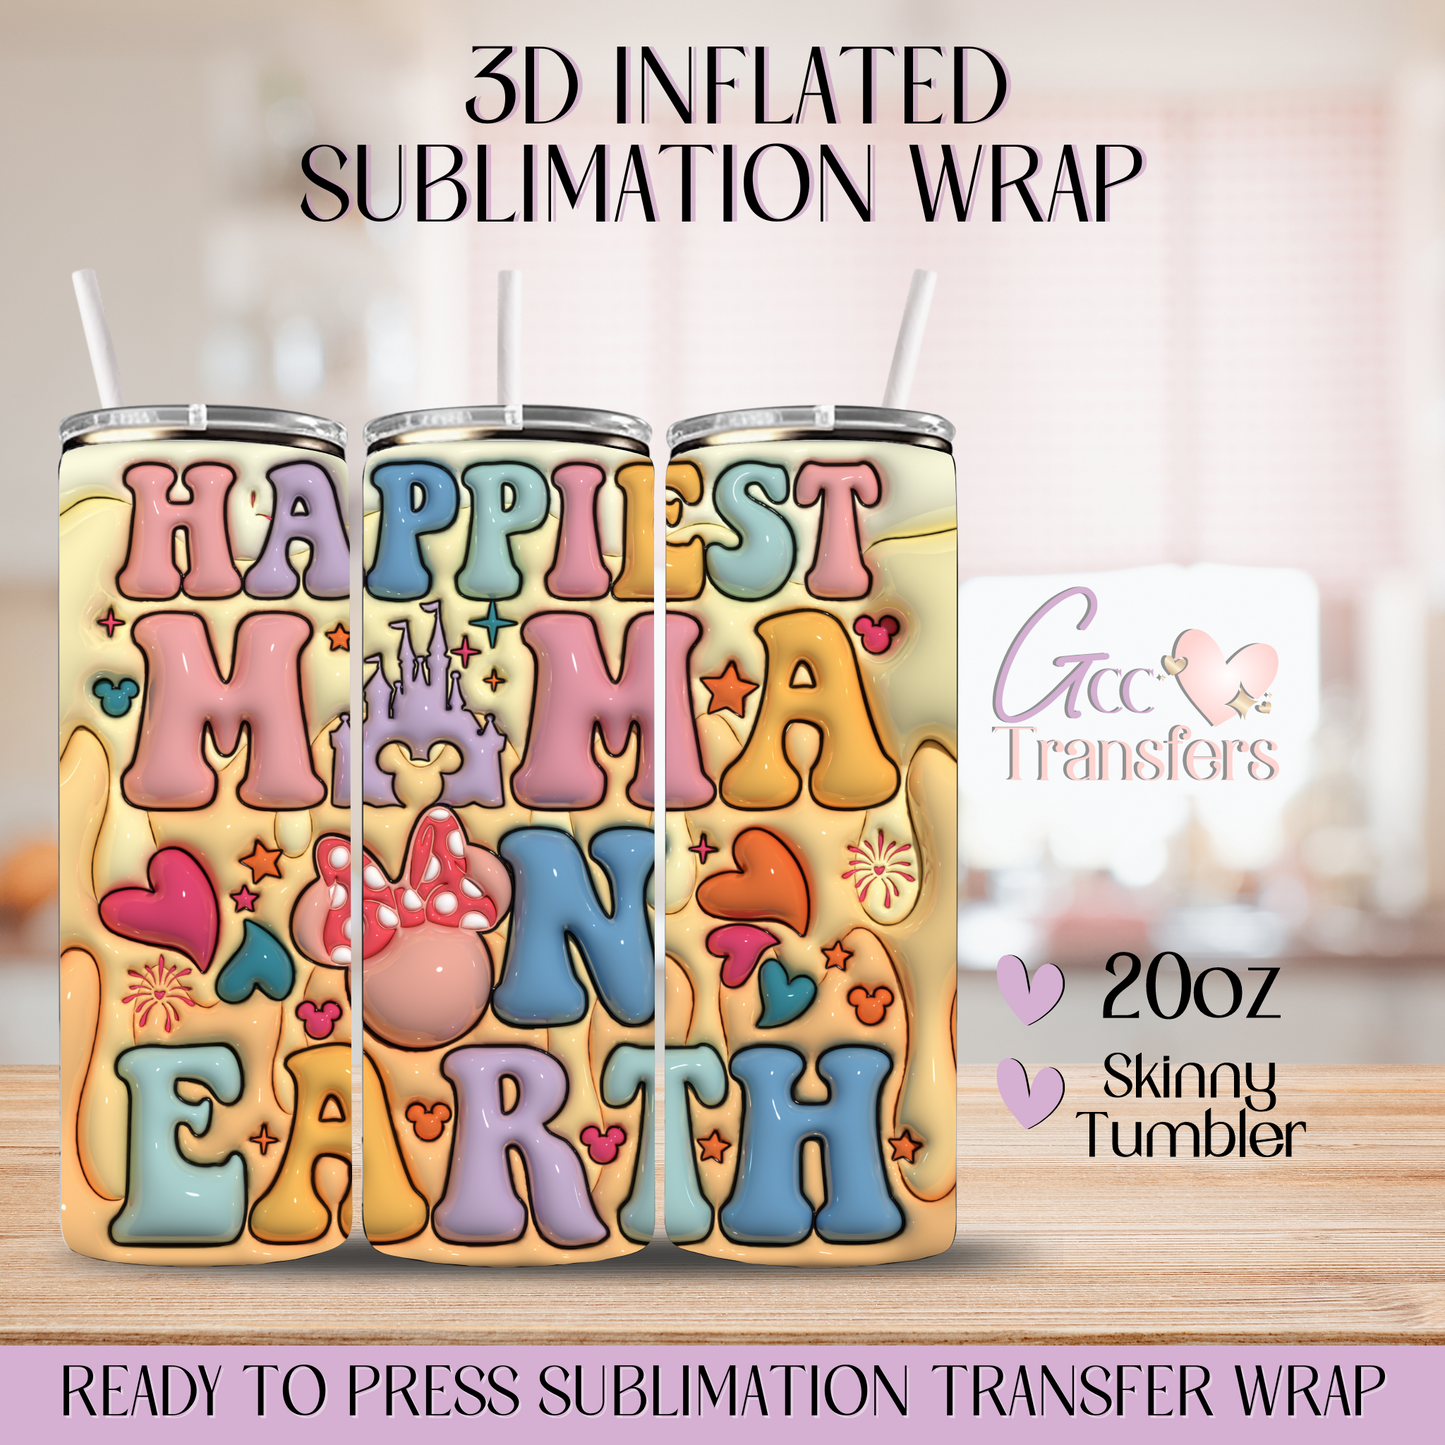 Happiest Mama on Earth - 20oz 3D Inflated Sublimation Wrap